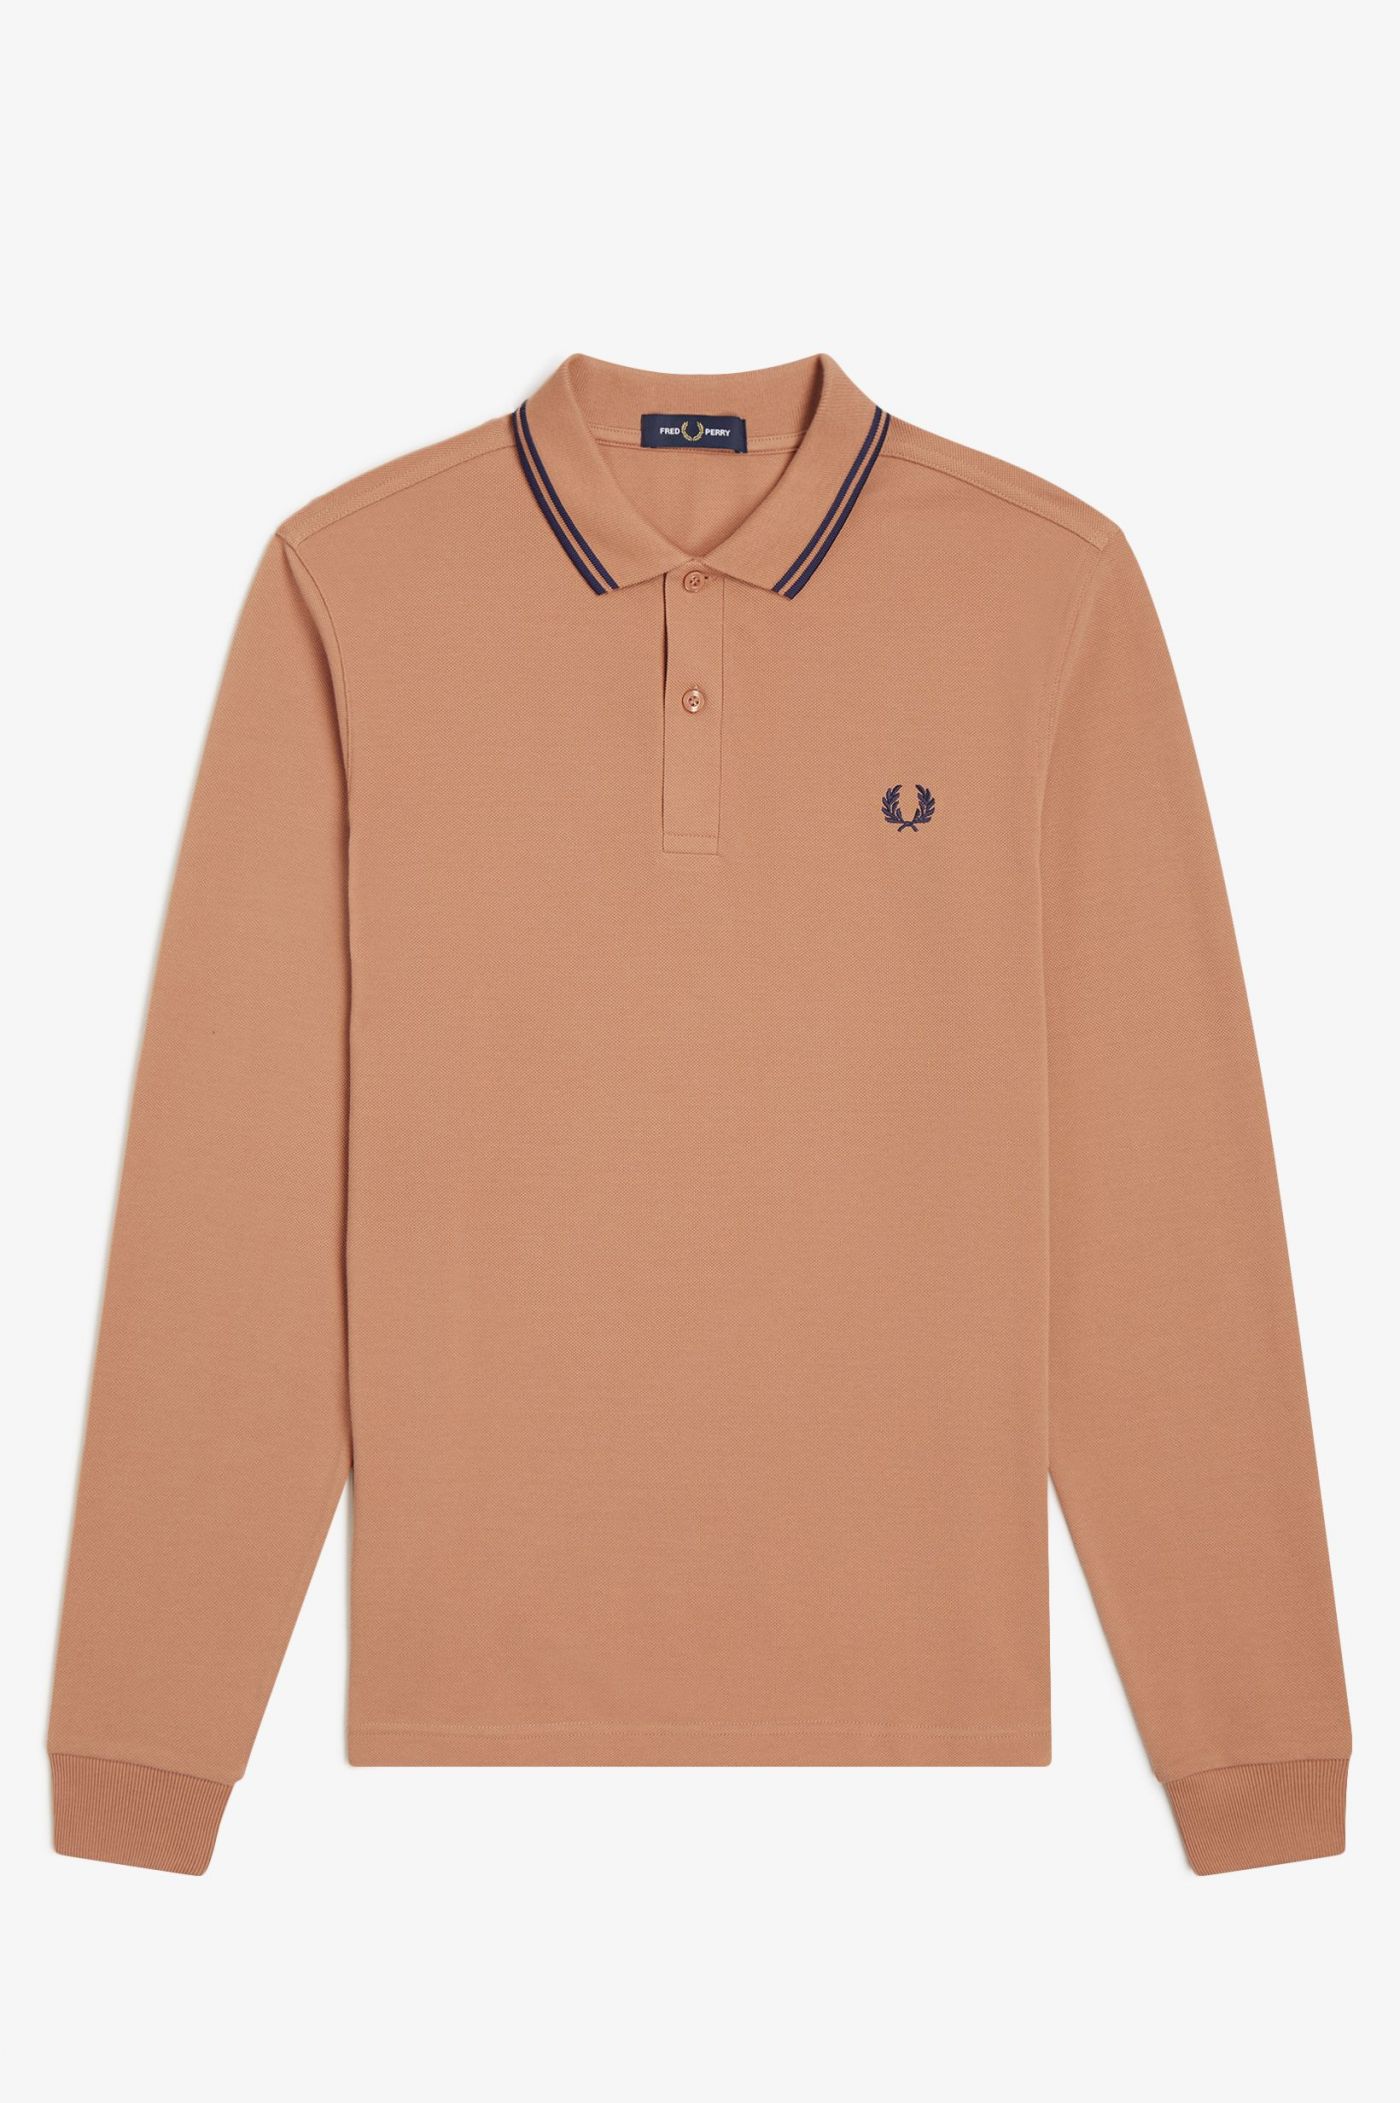 M3636 - Light Rust / French Navy / French Navy | The Fred Perry